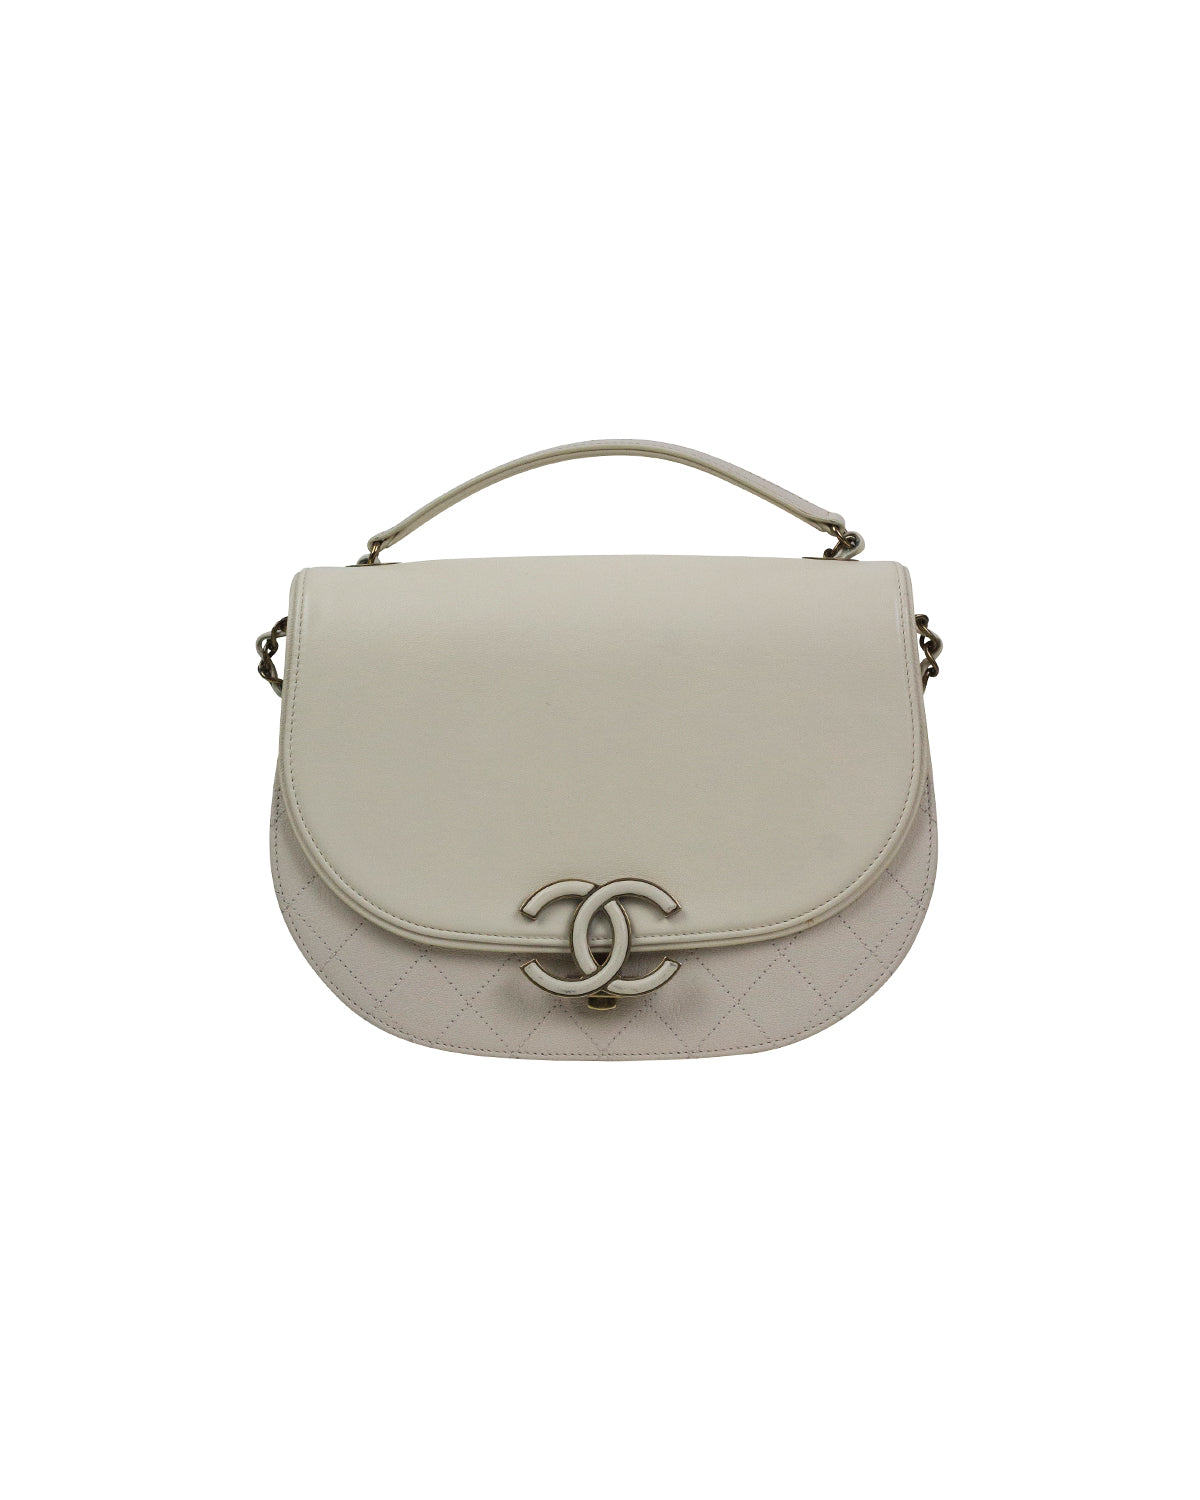 Shop Coco Handle Chanel Sizes  UP TO 55 OFF